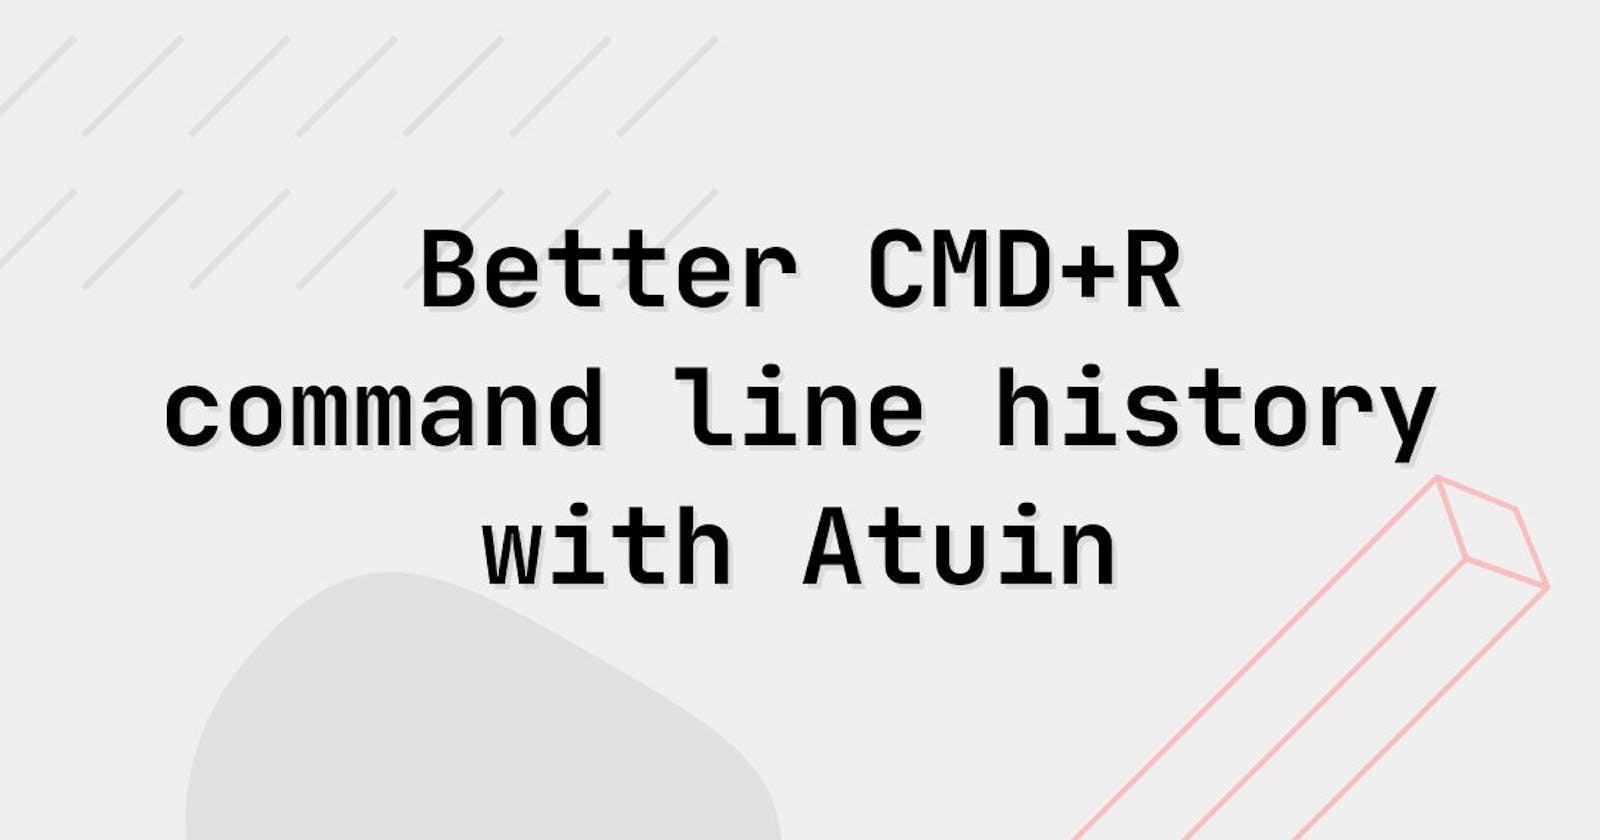 Better CMD+R - Improved command line history using Atuin